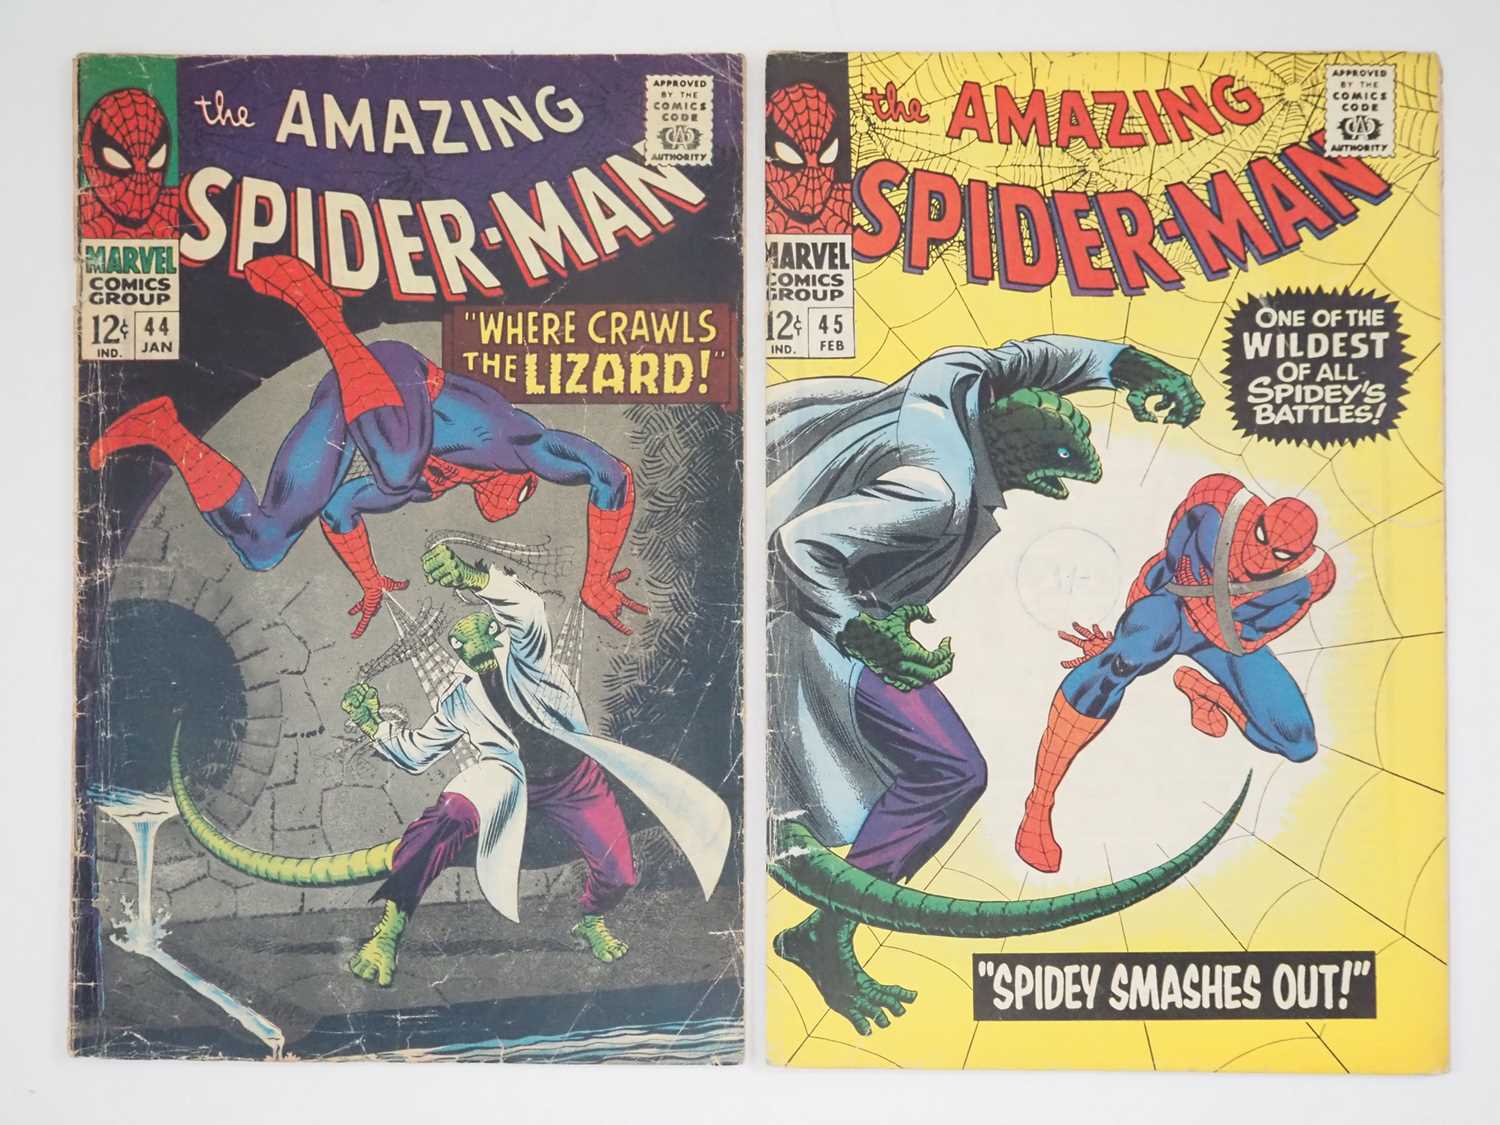 AMAZING SPIDER-MAN #44 & 45 (2 in Lot) - (1967 - MARVEL) - Second & third appearances of the